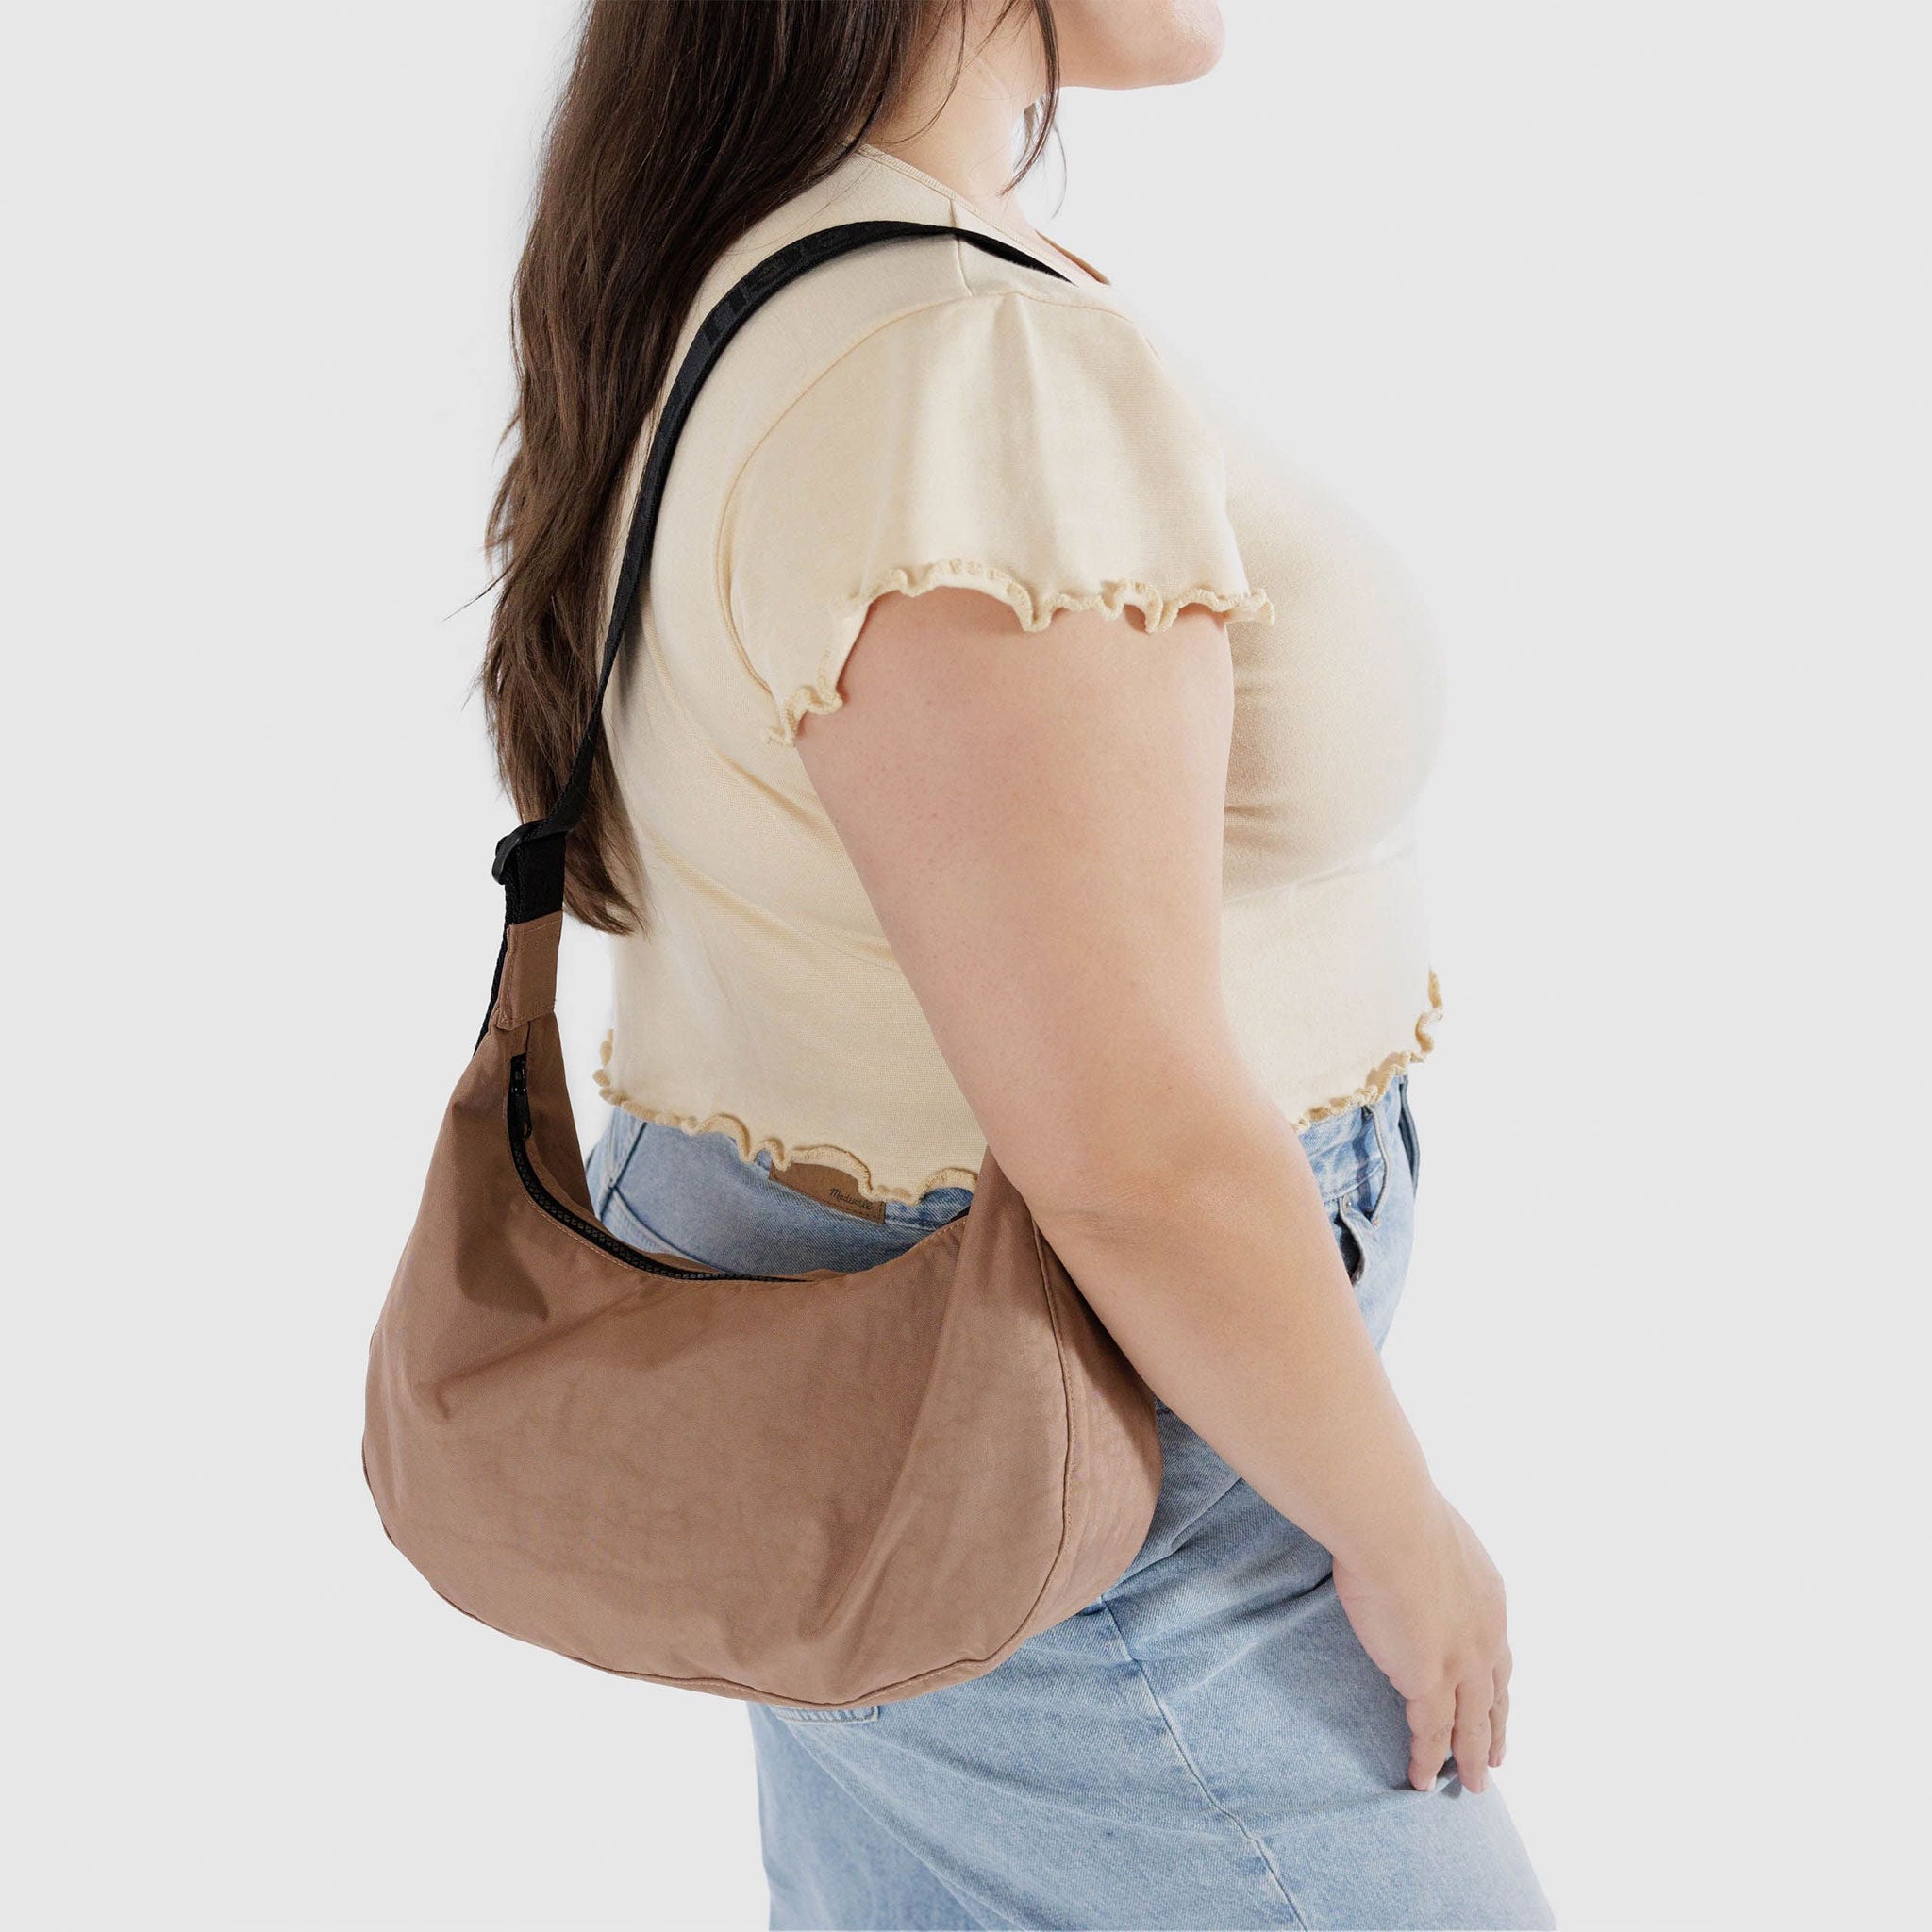 a light brown crescent shaped bag with black strap